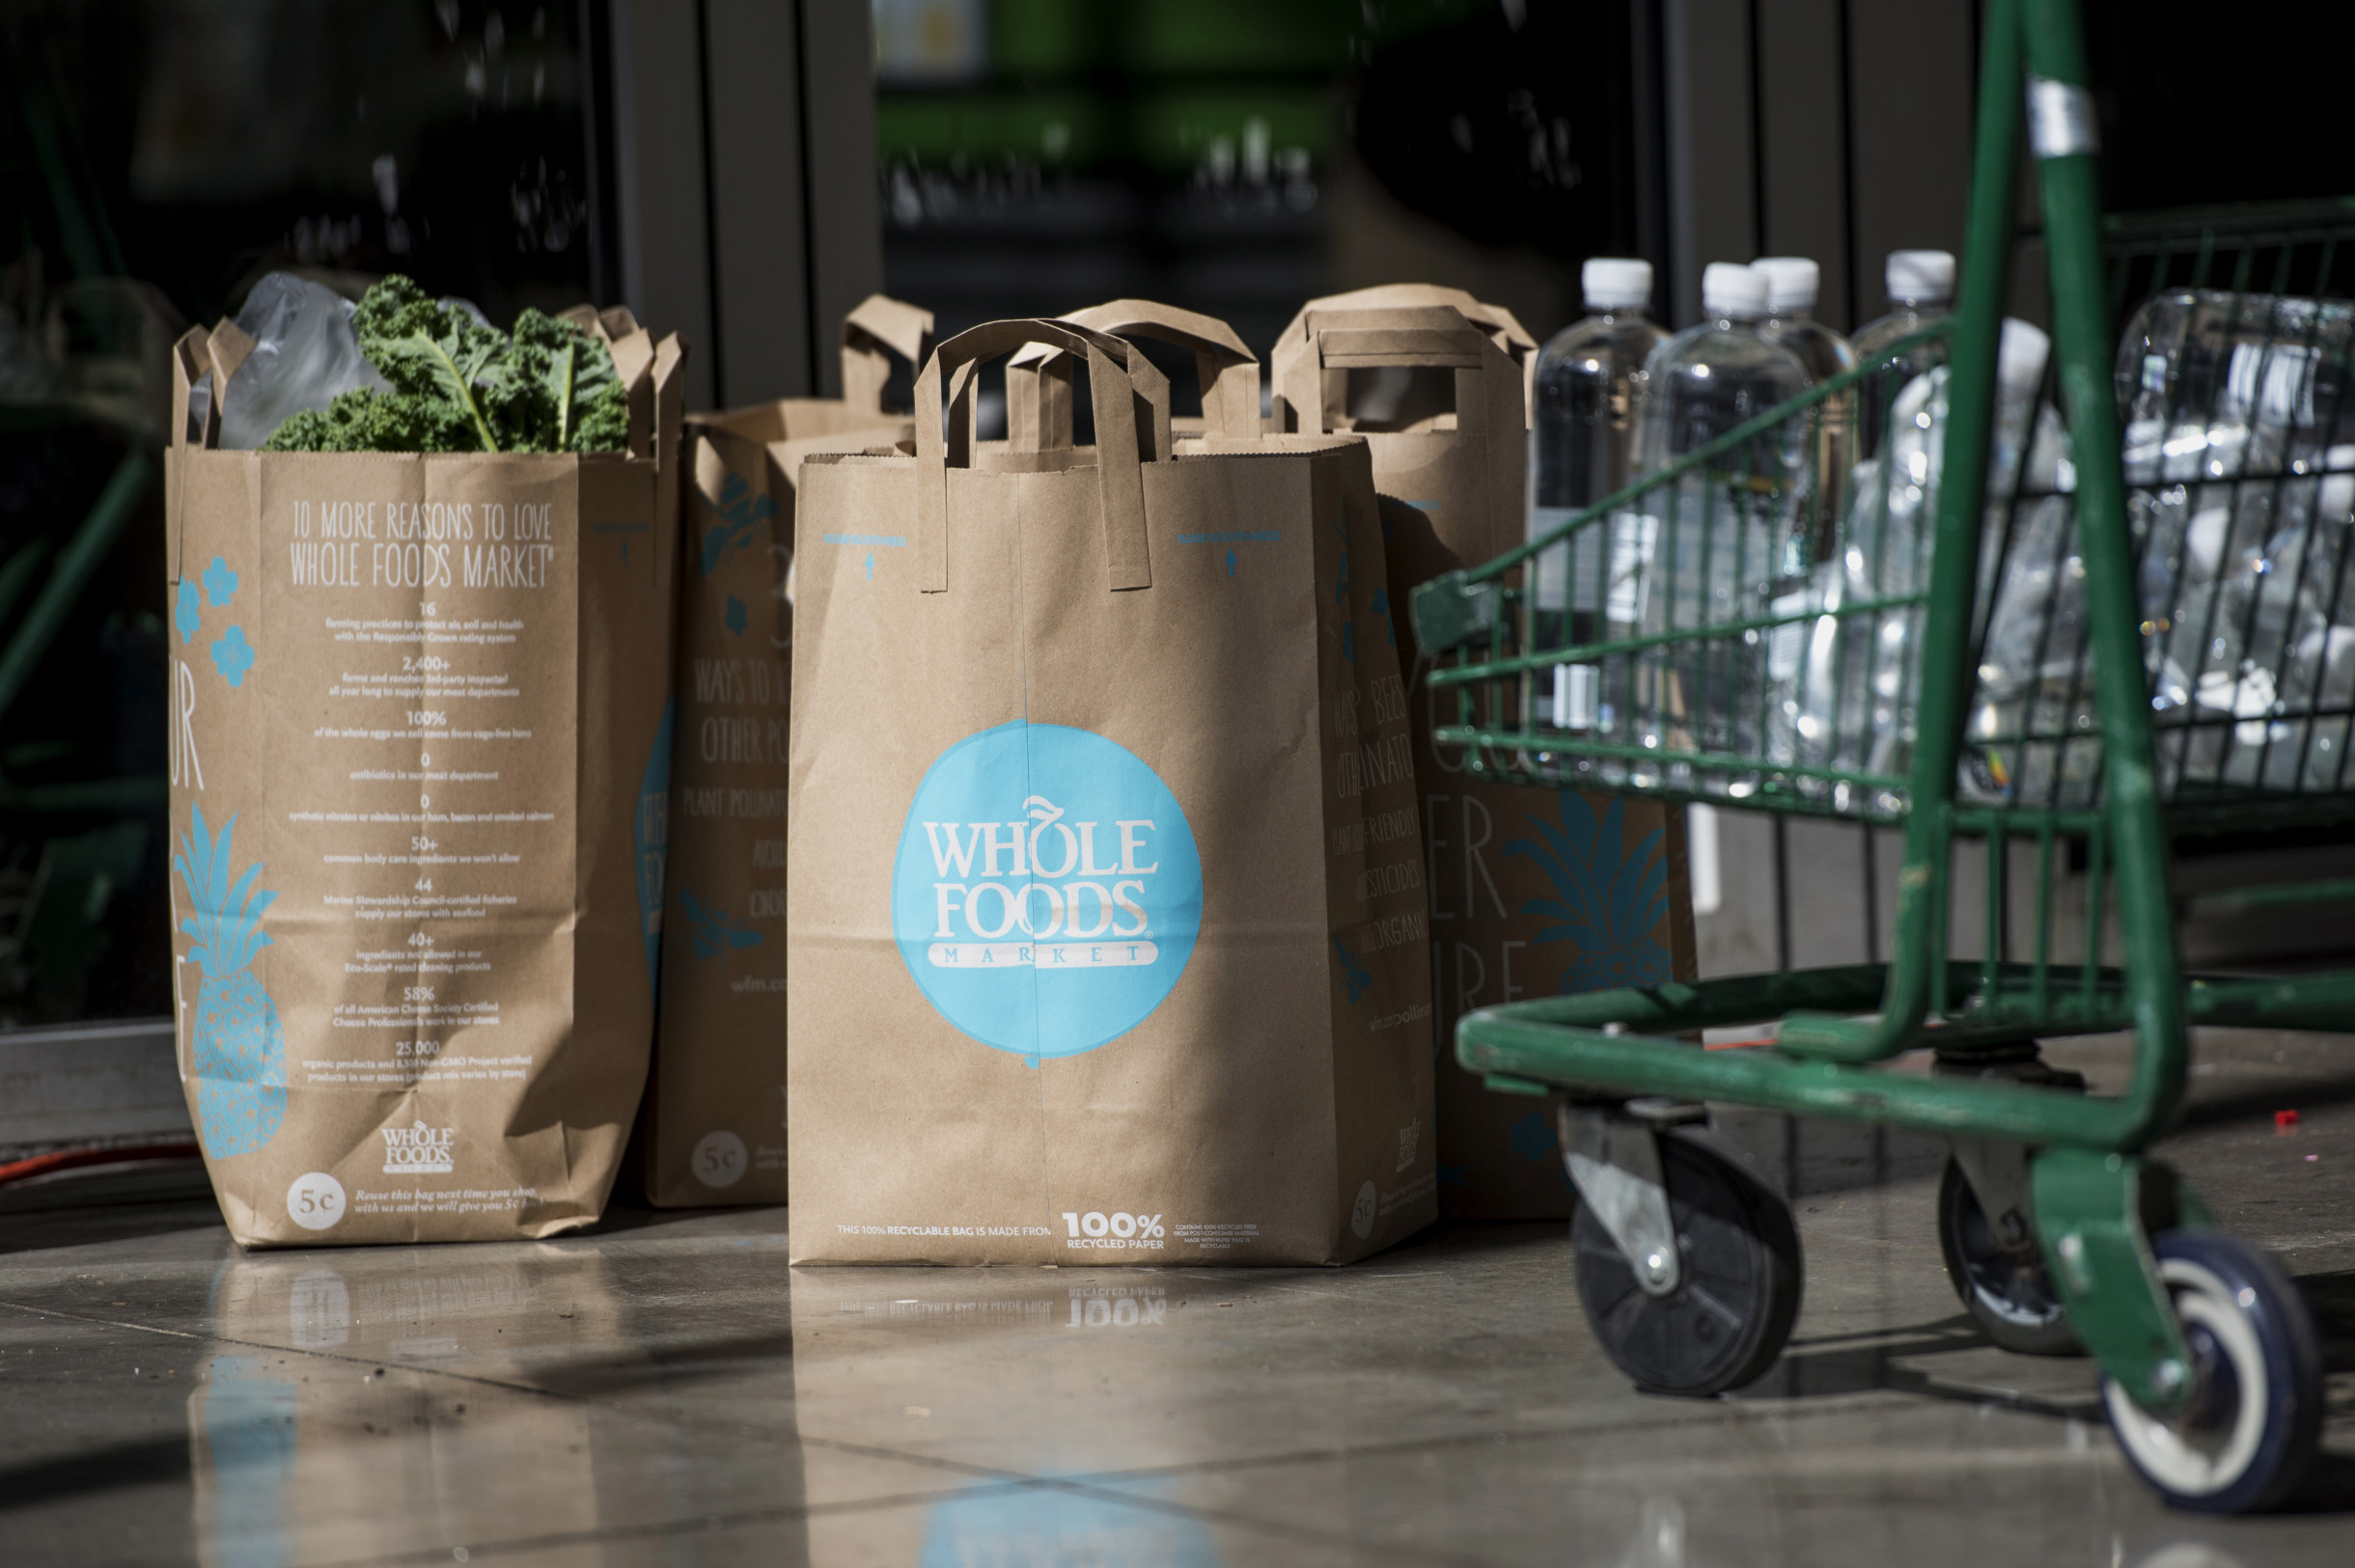  Whole Foods delivery expands to Detroit, Ann Arbor